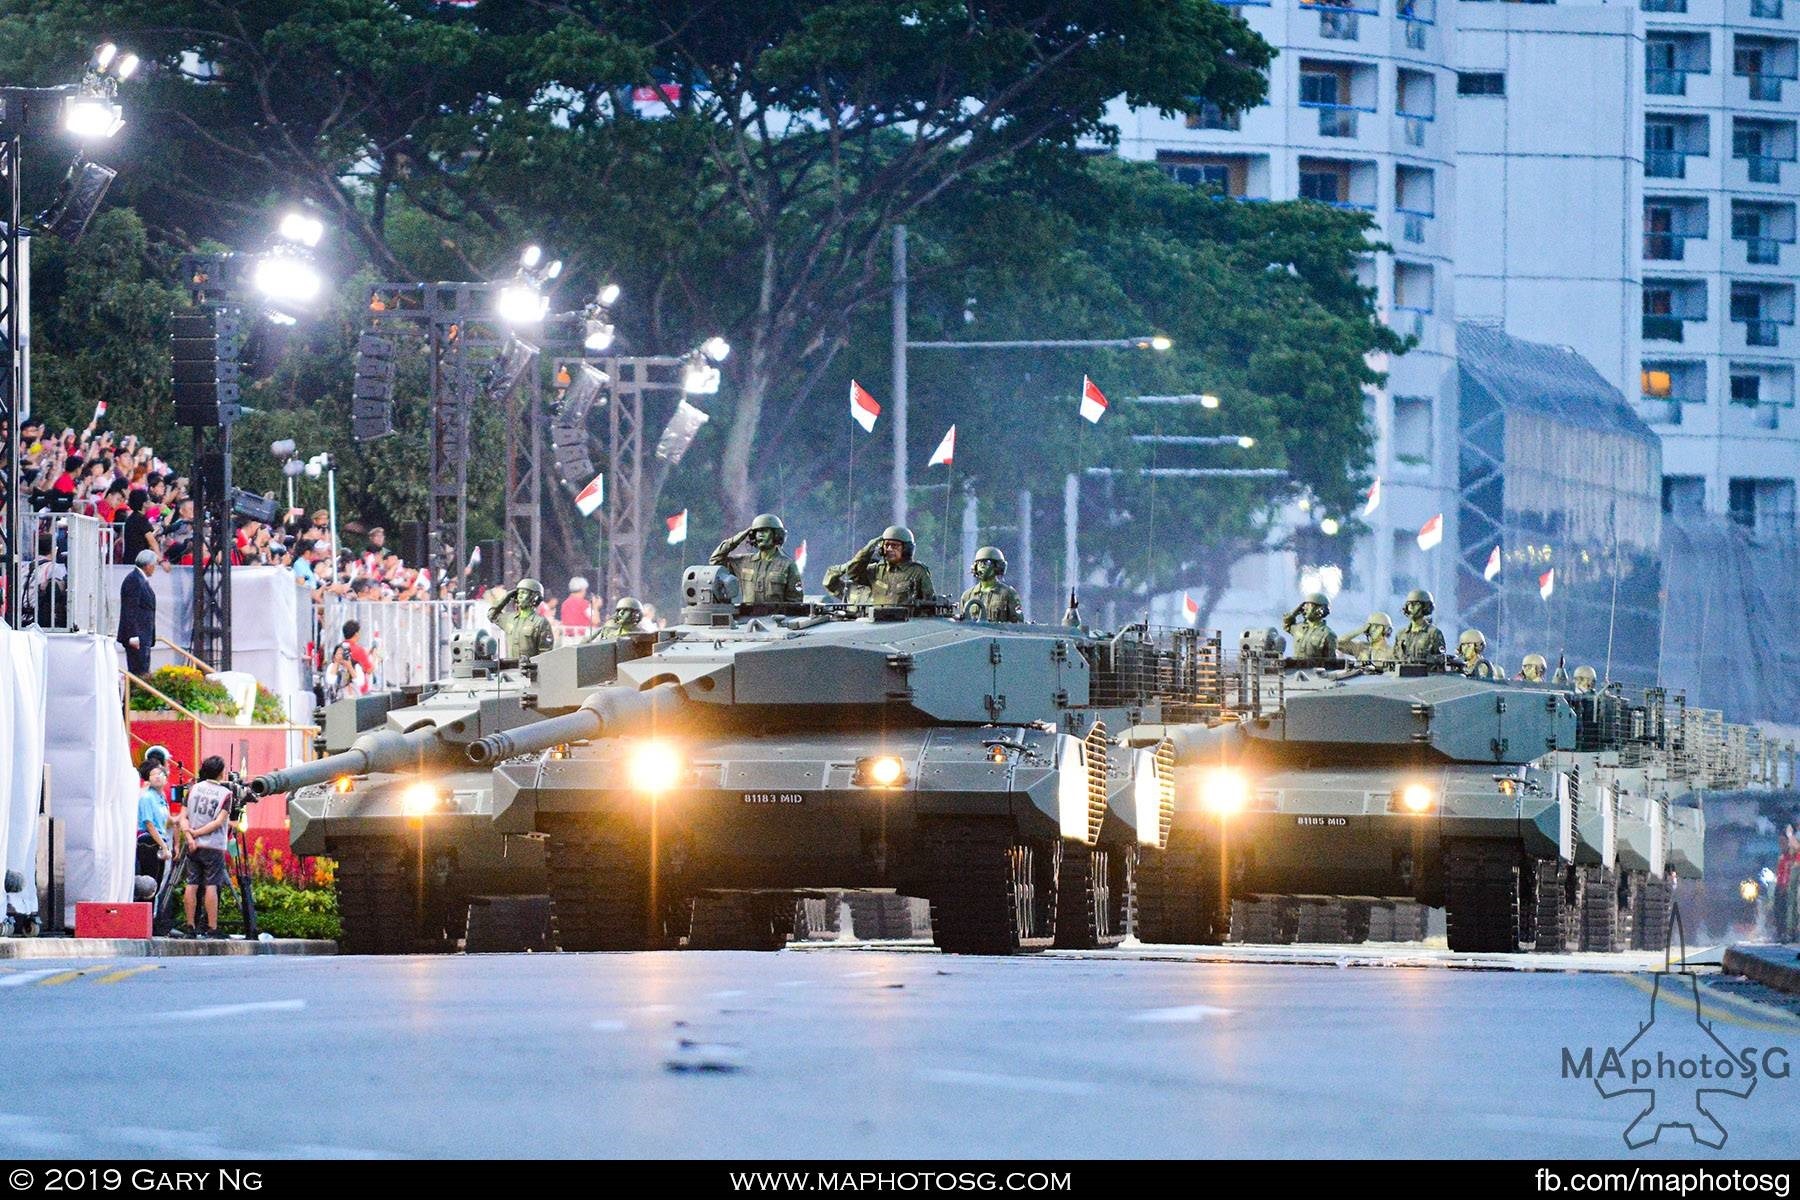 Mobile Column lead by LTC (NS) Chin Chee Whye and BG (RET) Colin Theseira in the Leopard 2SG tank